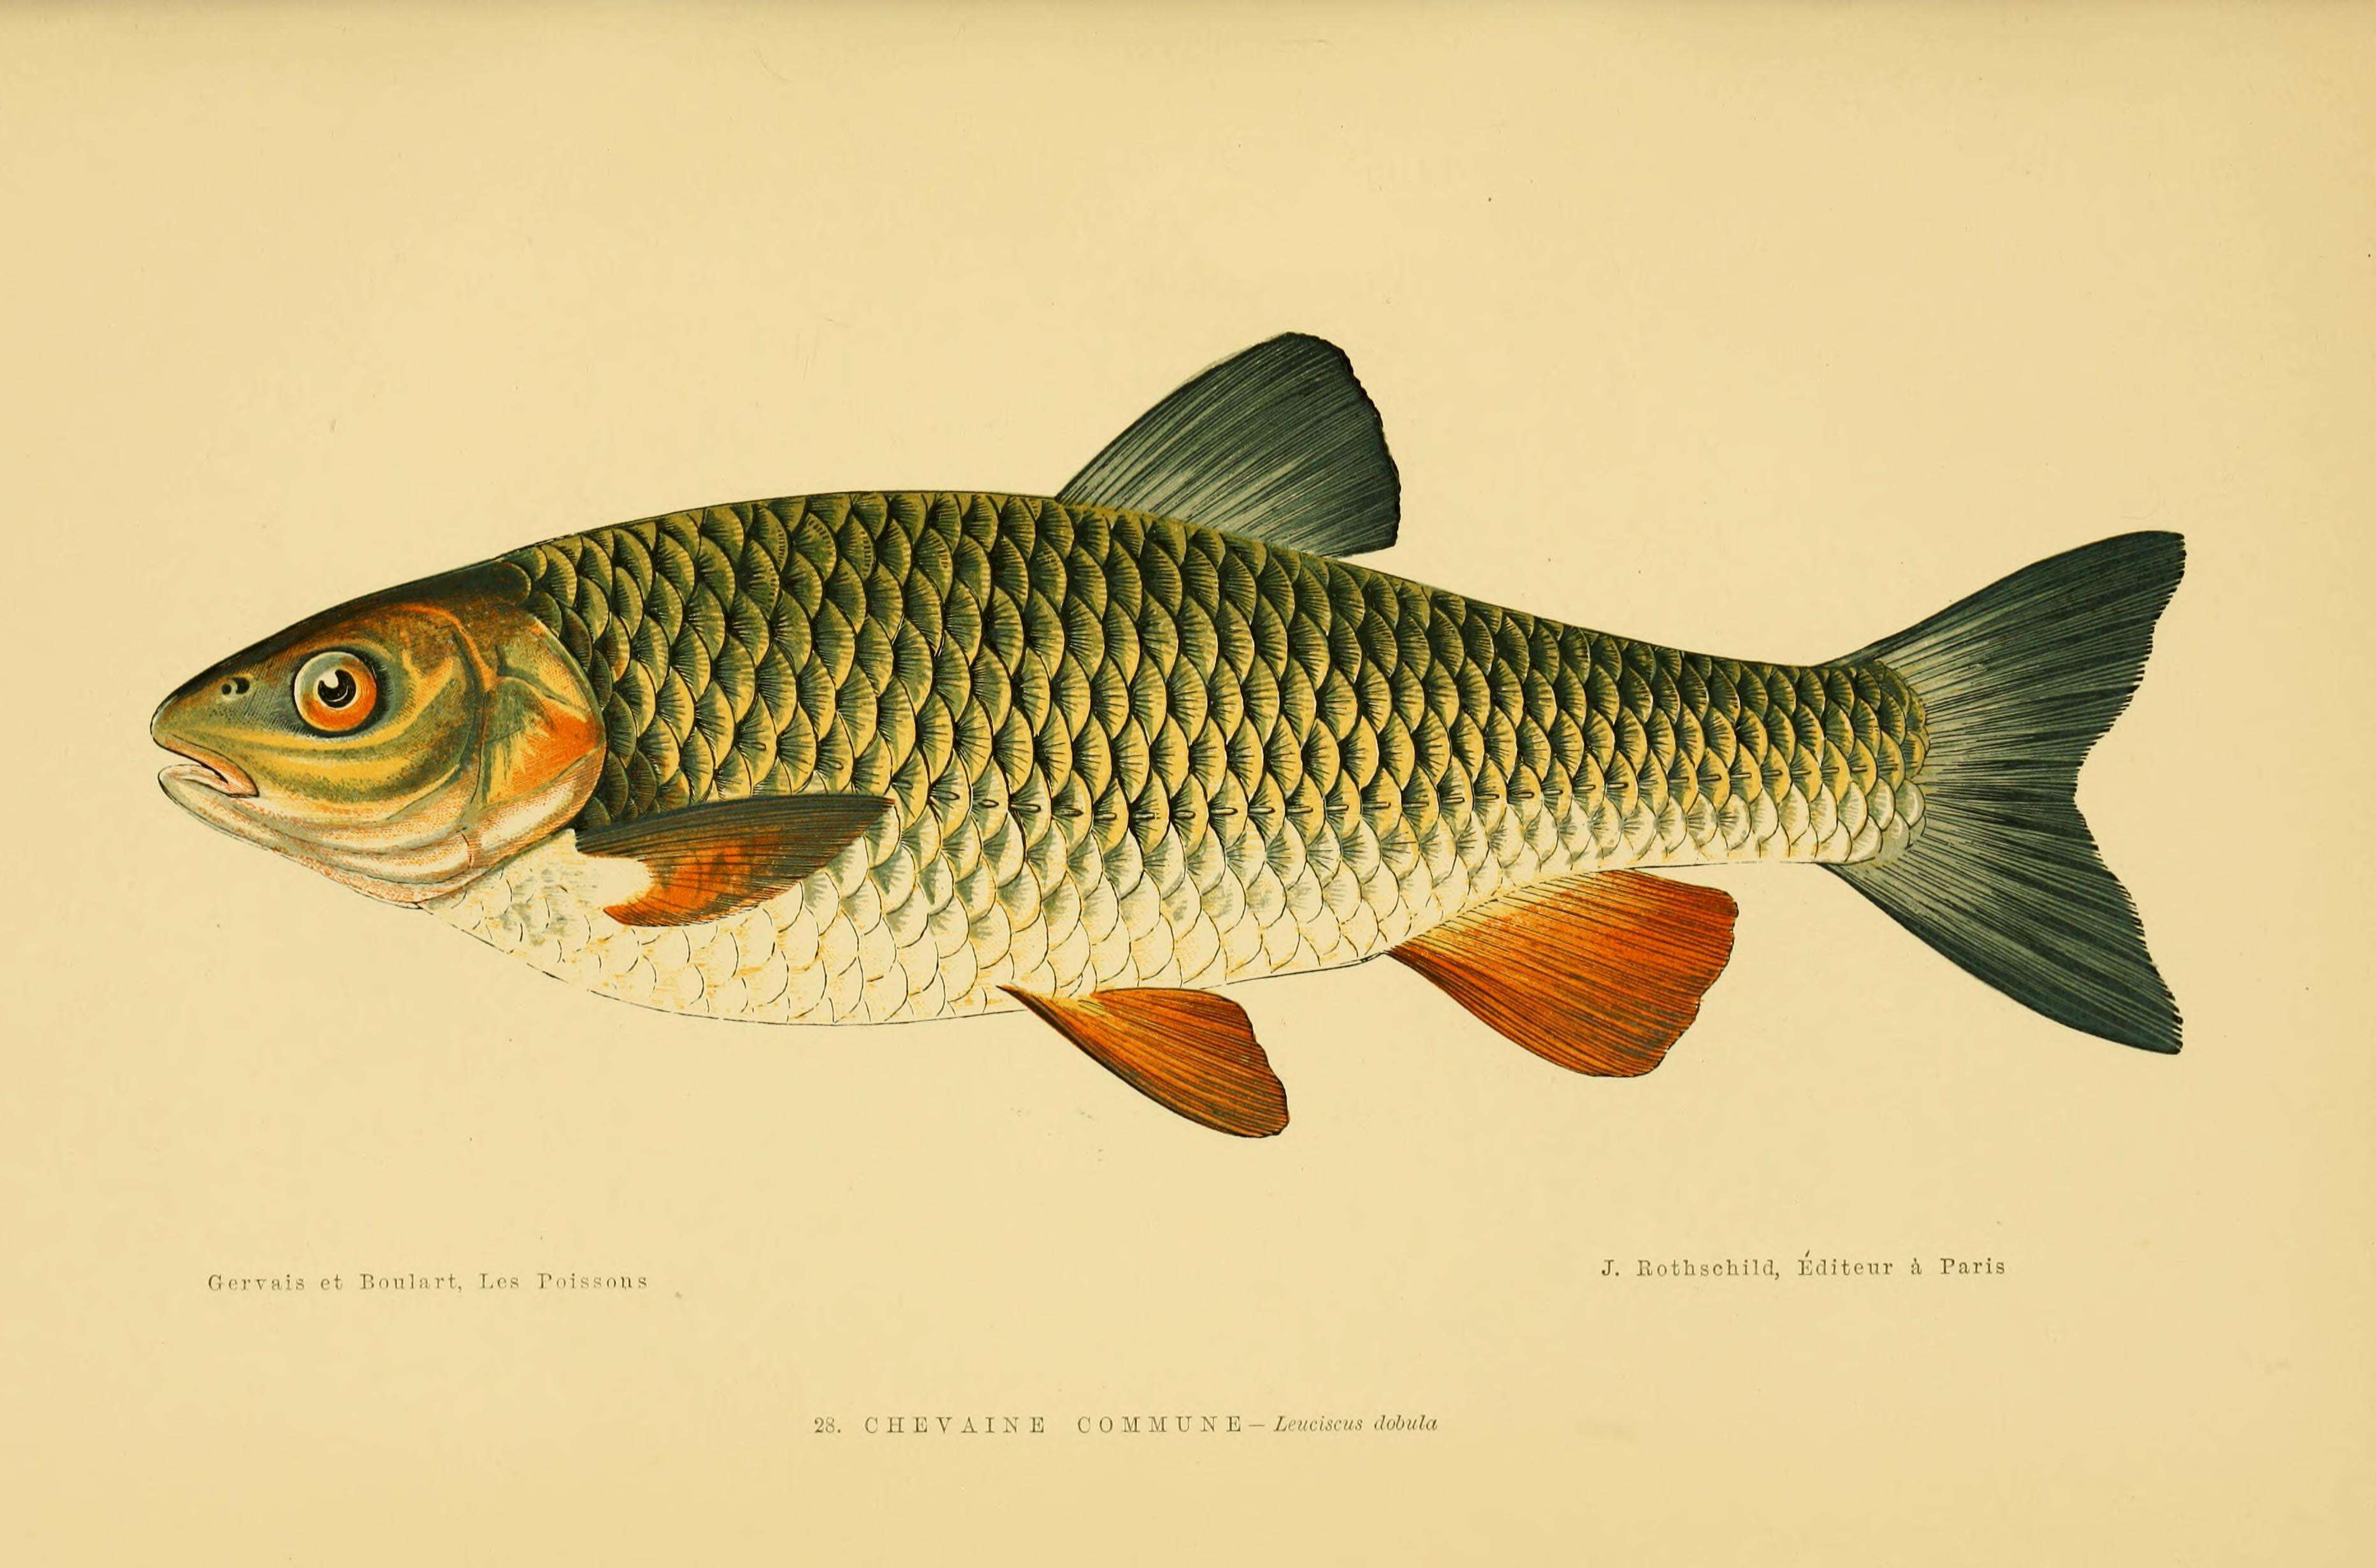 Image of Common dace